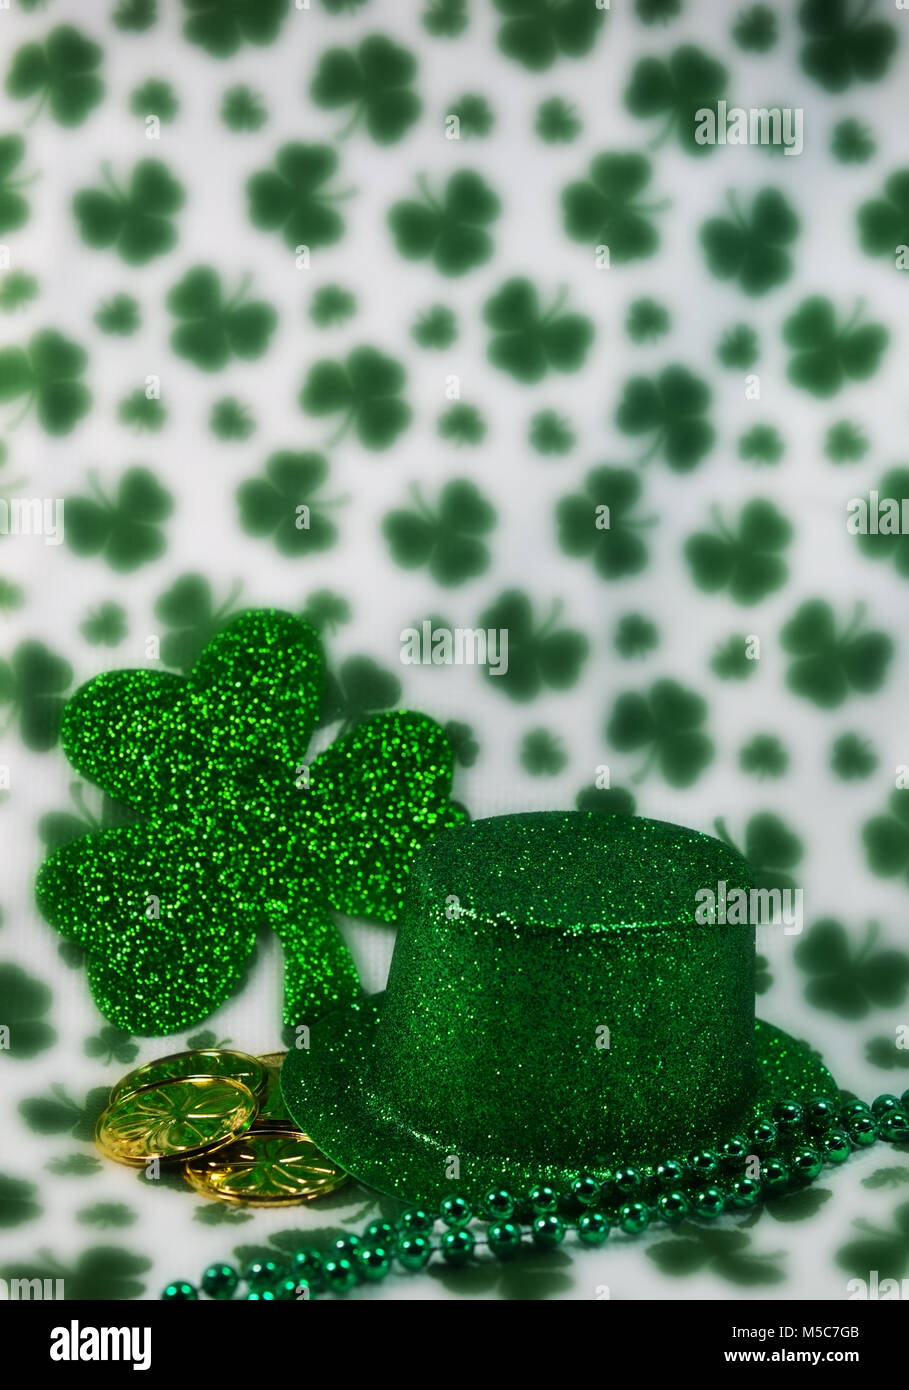 Irish Glittery Green Top Hat with Shiny Green Four Leaf Clover shamrock background and gold coins Stock Photo